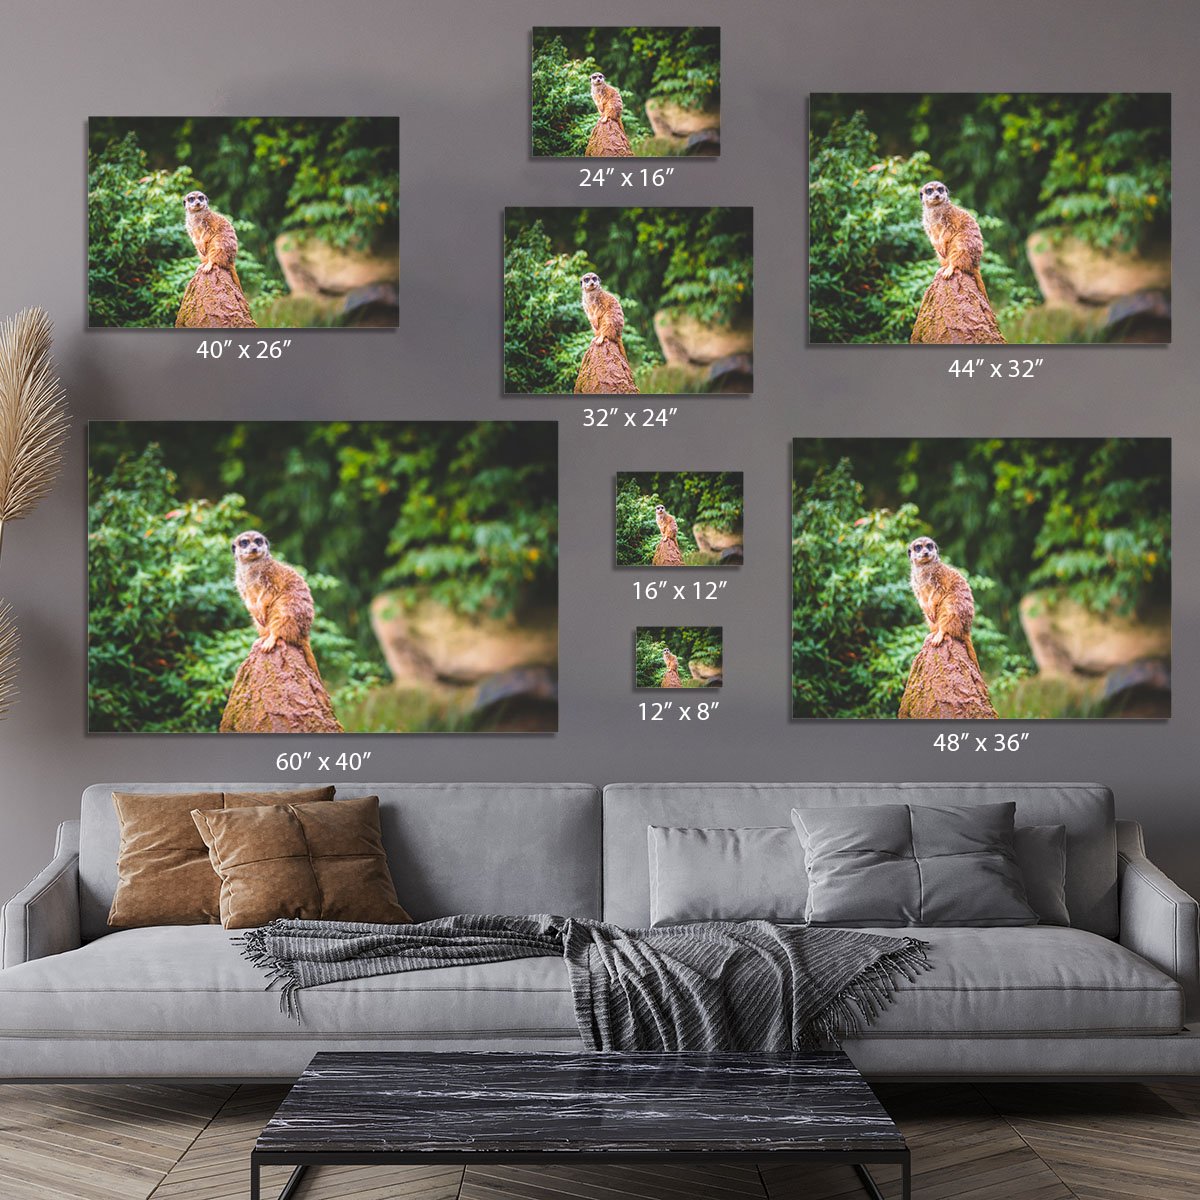 A Meerkats full attention Canvas Print or Poster